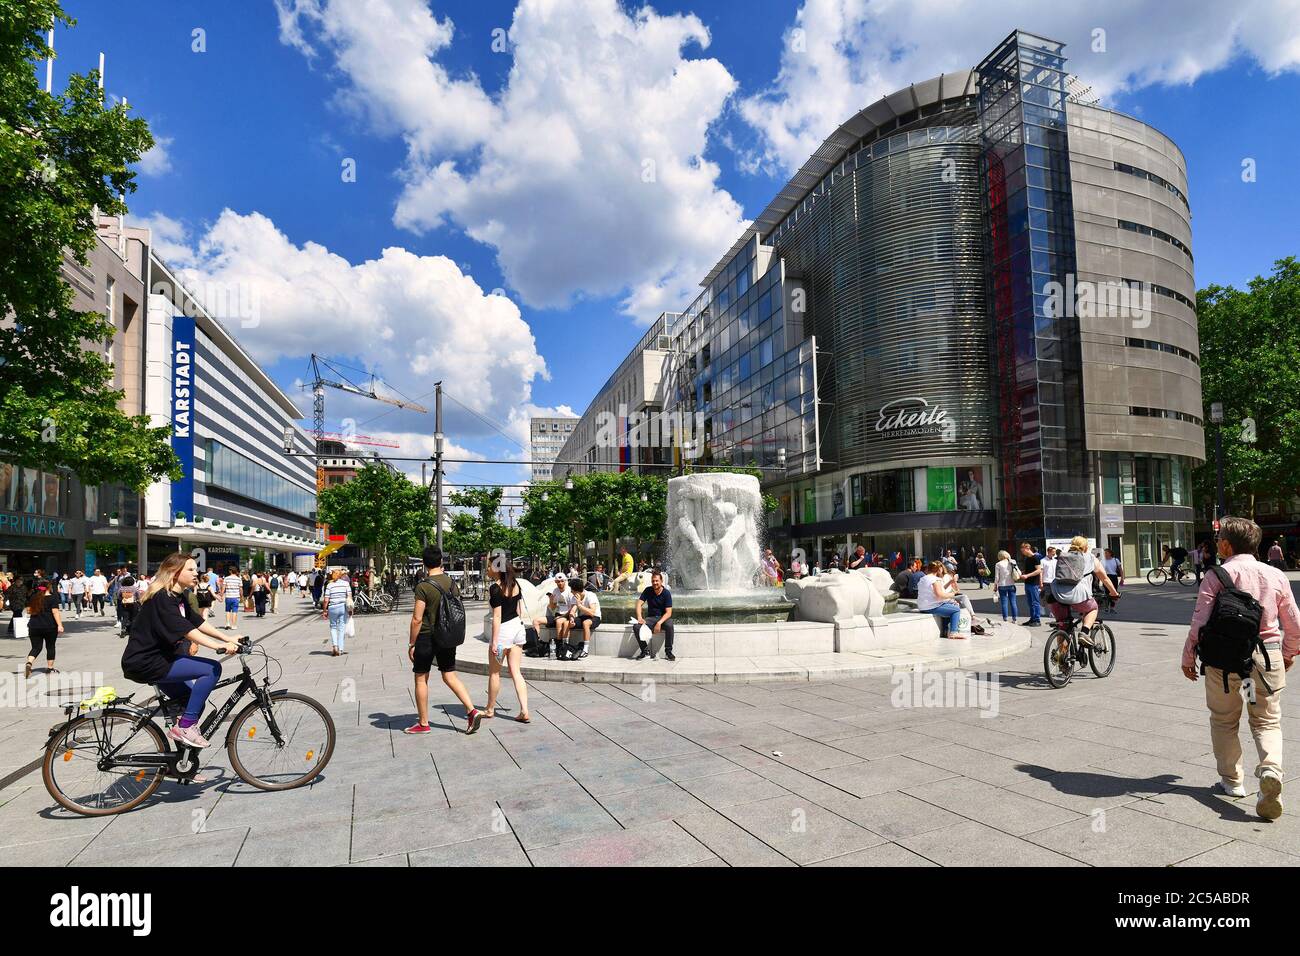 Frankfurt am Main, Germany - June 2020: Main shopping street called 'Zeil' with 'Brockhaus' Fountain on a sunny day full of people Stock Photo